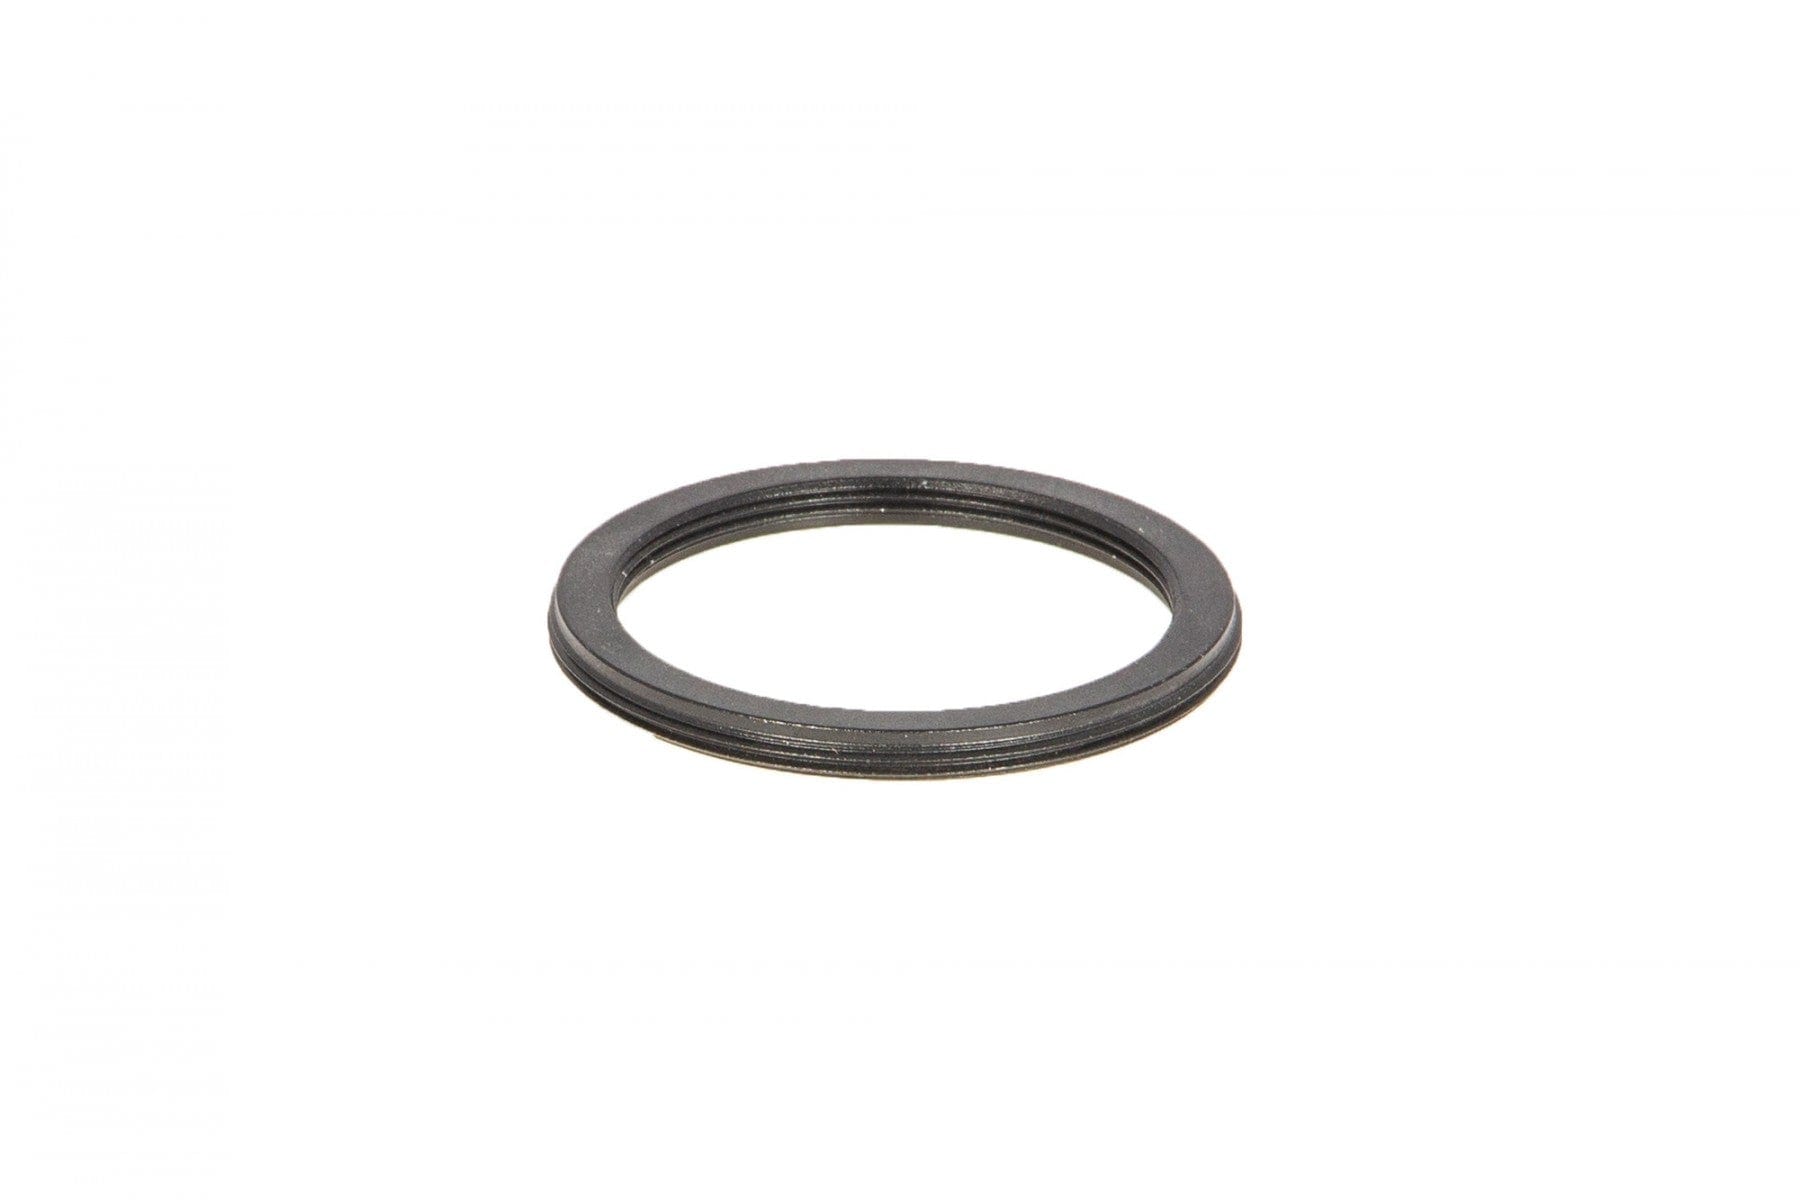 Baader Planetarium Accessory Baader 2"ext/M41.5int x 1, Zero-length thread reducing piece, to connect Hyperion Zoom Mark IV to the eyepiece outer thread of Bausch & Lomb, Opticron, and Kowa-Basis-Spotters - 2454832